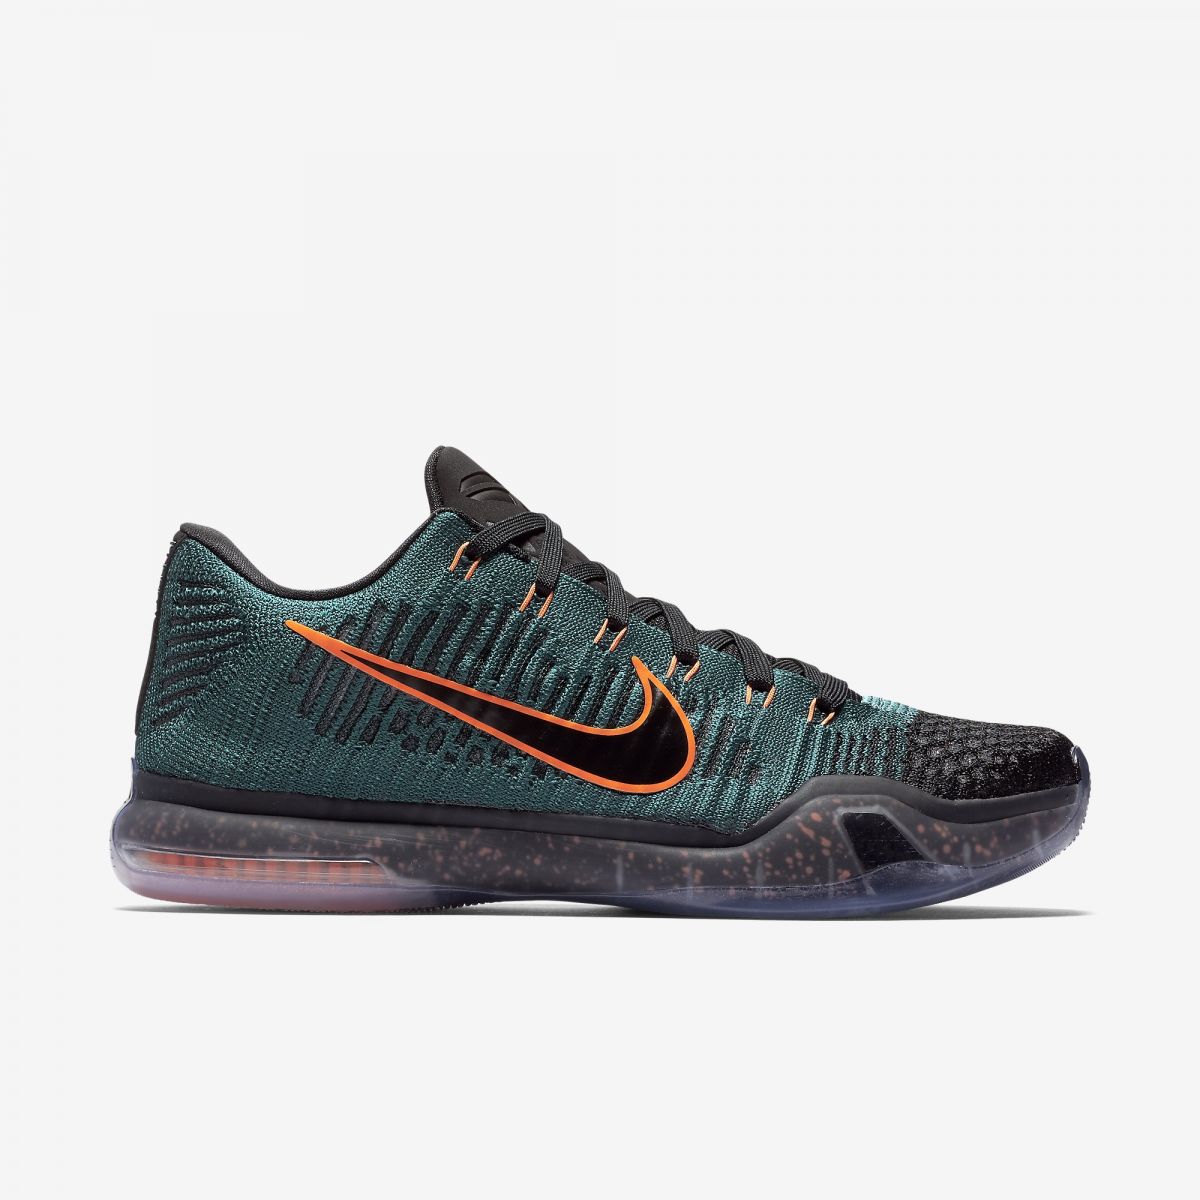 The Complete Guide to the Nike Kobe 10 | Sole Collector